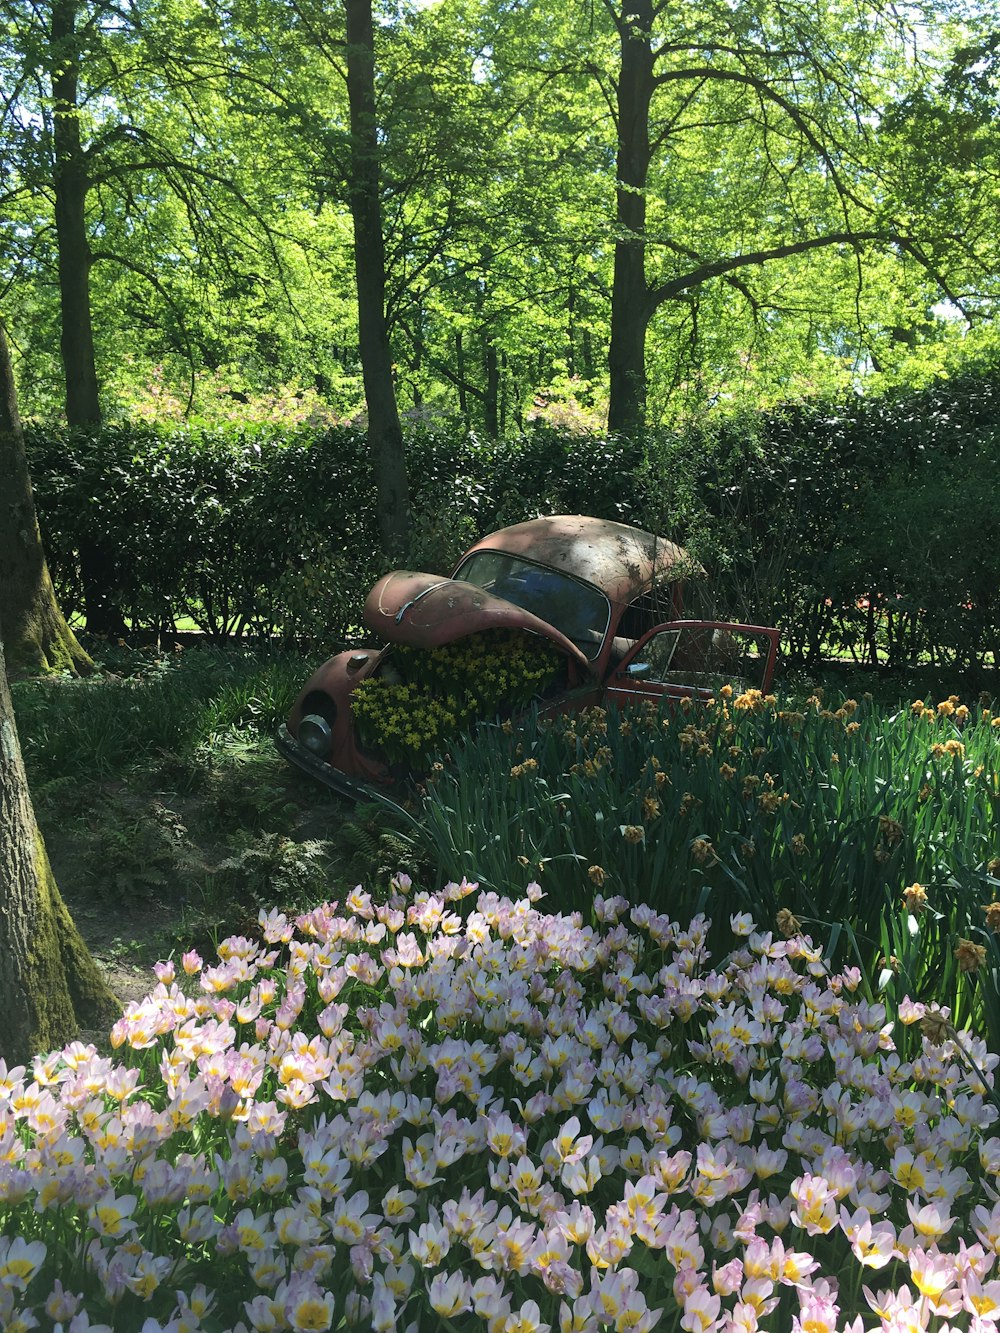 a person lying on a chair in a garden